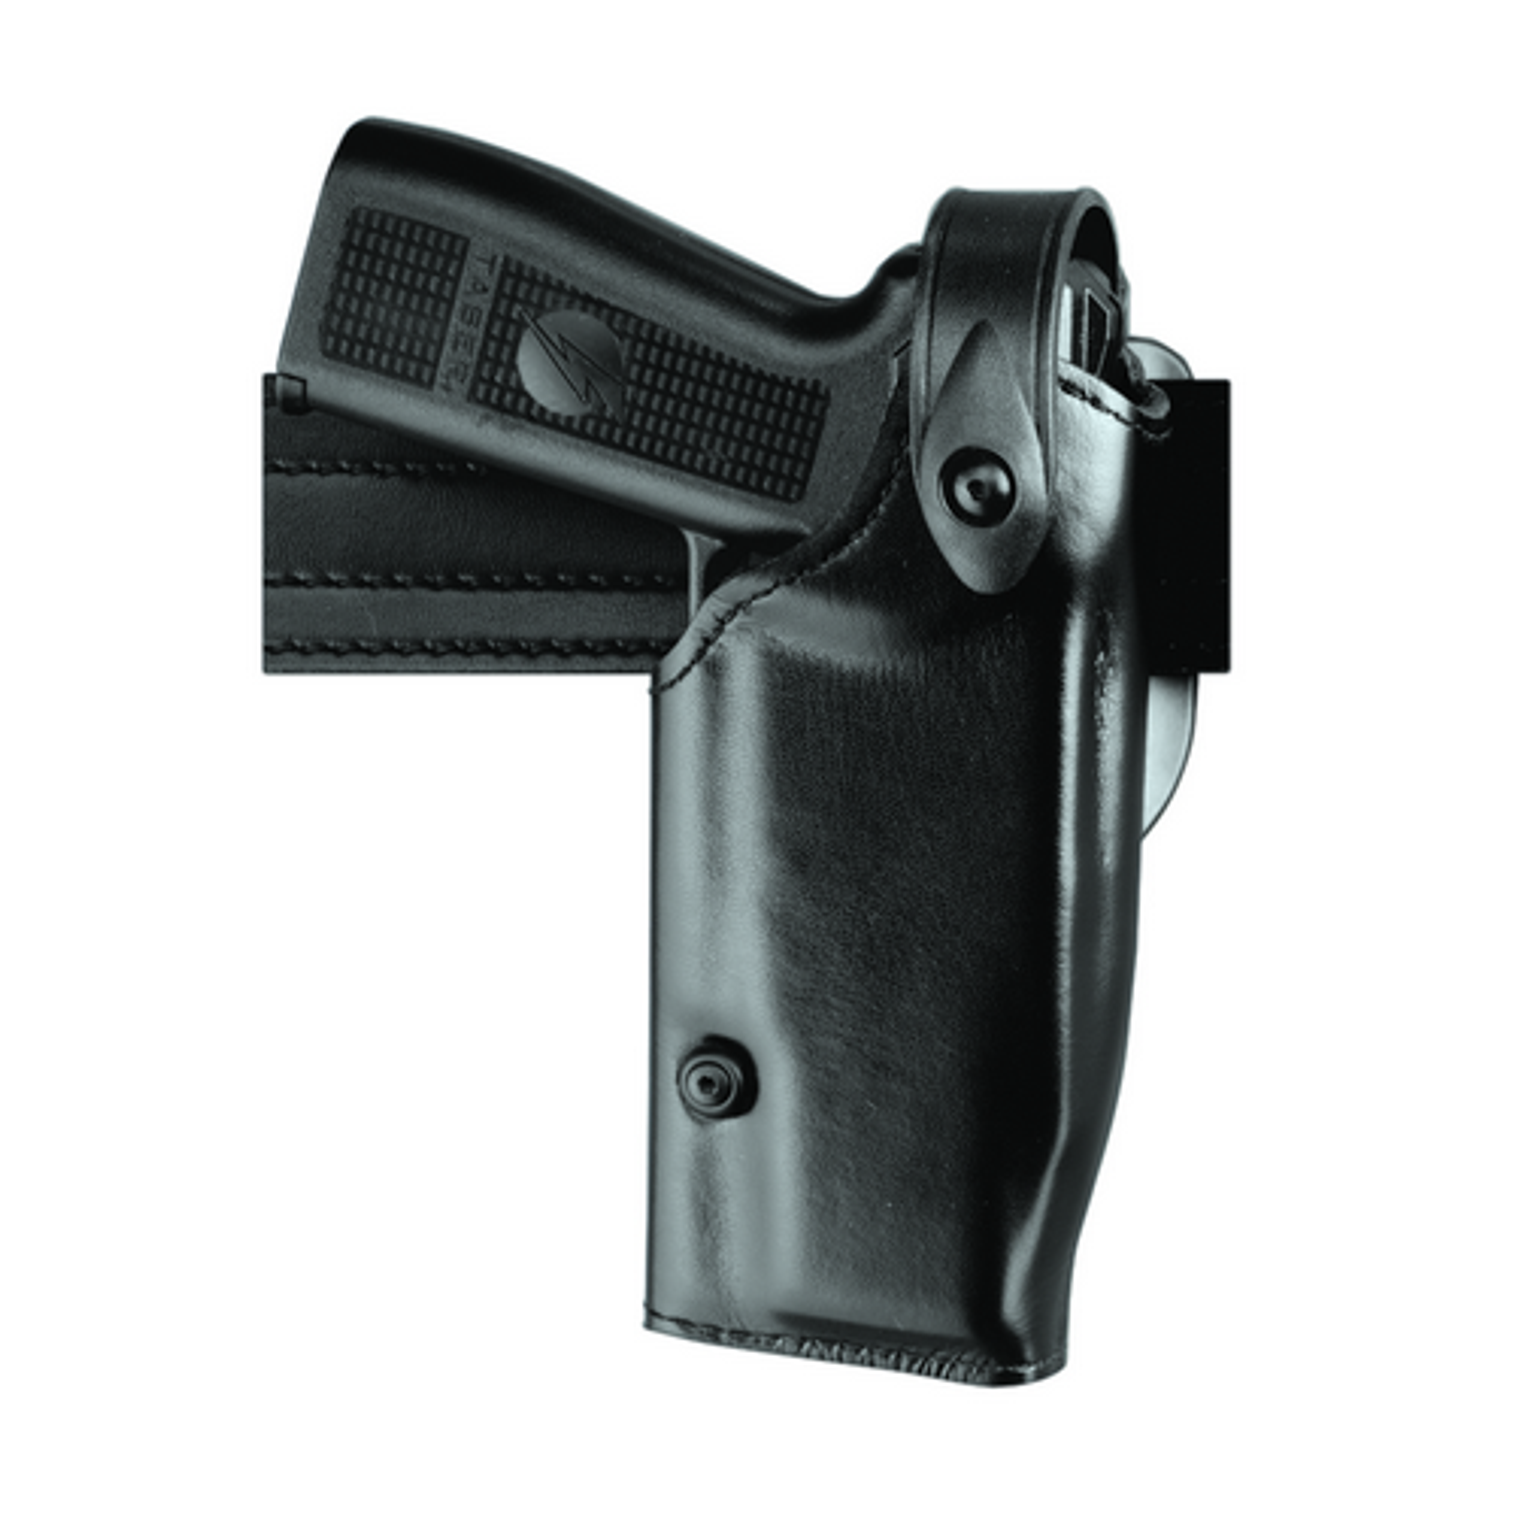 Model 6280 Sls Mid-ride Level Ii Retention Duty Holster For Smith & Wesson M&p 9 W/ Light - KR6280-21921-481